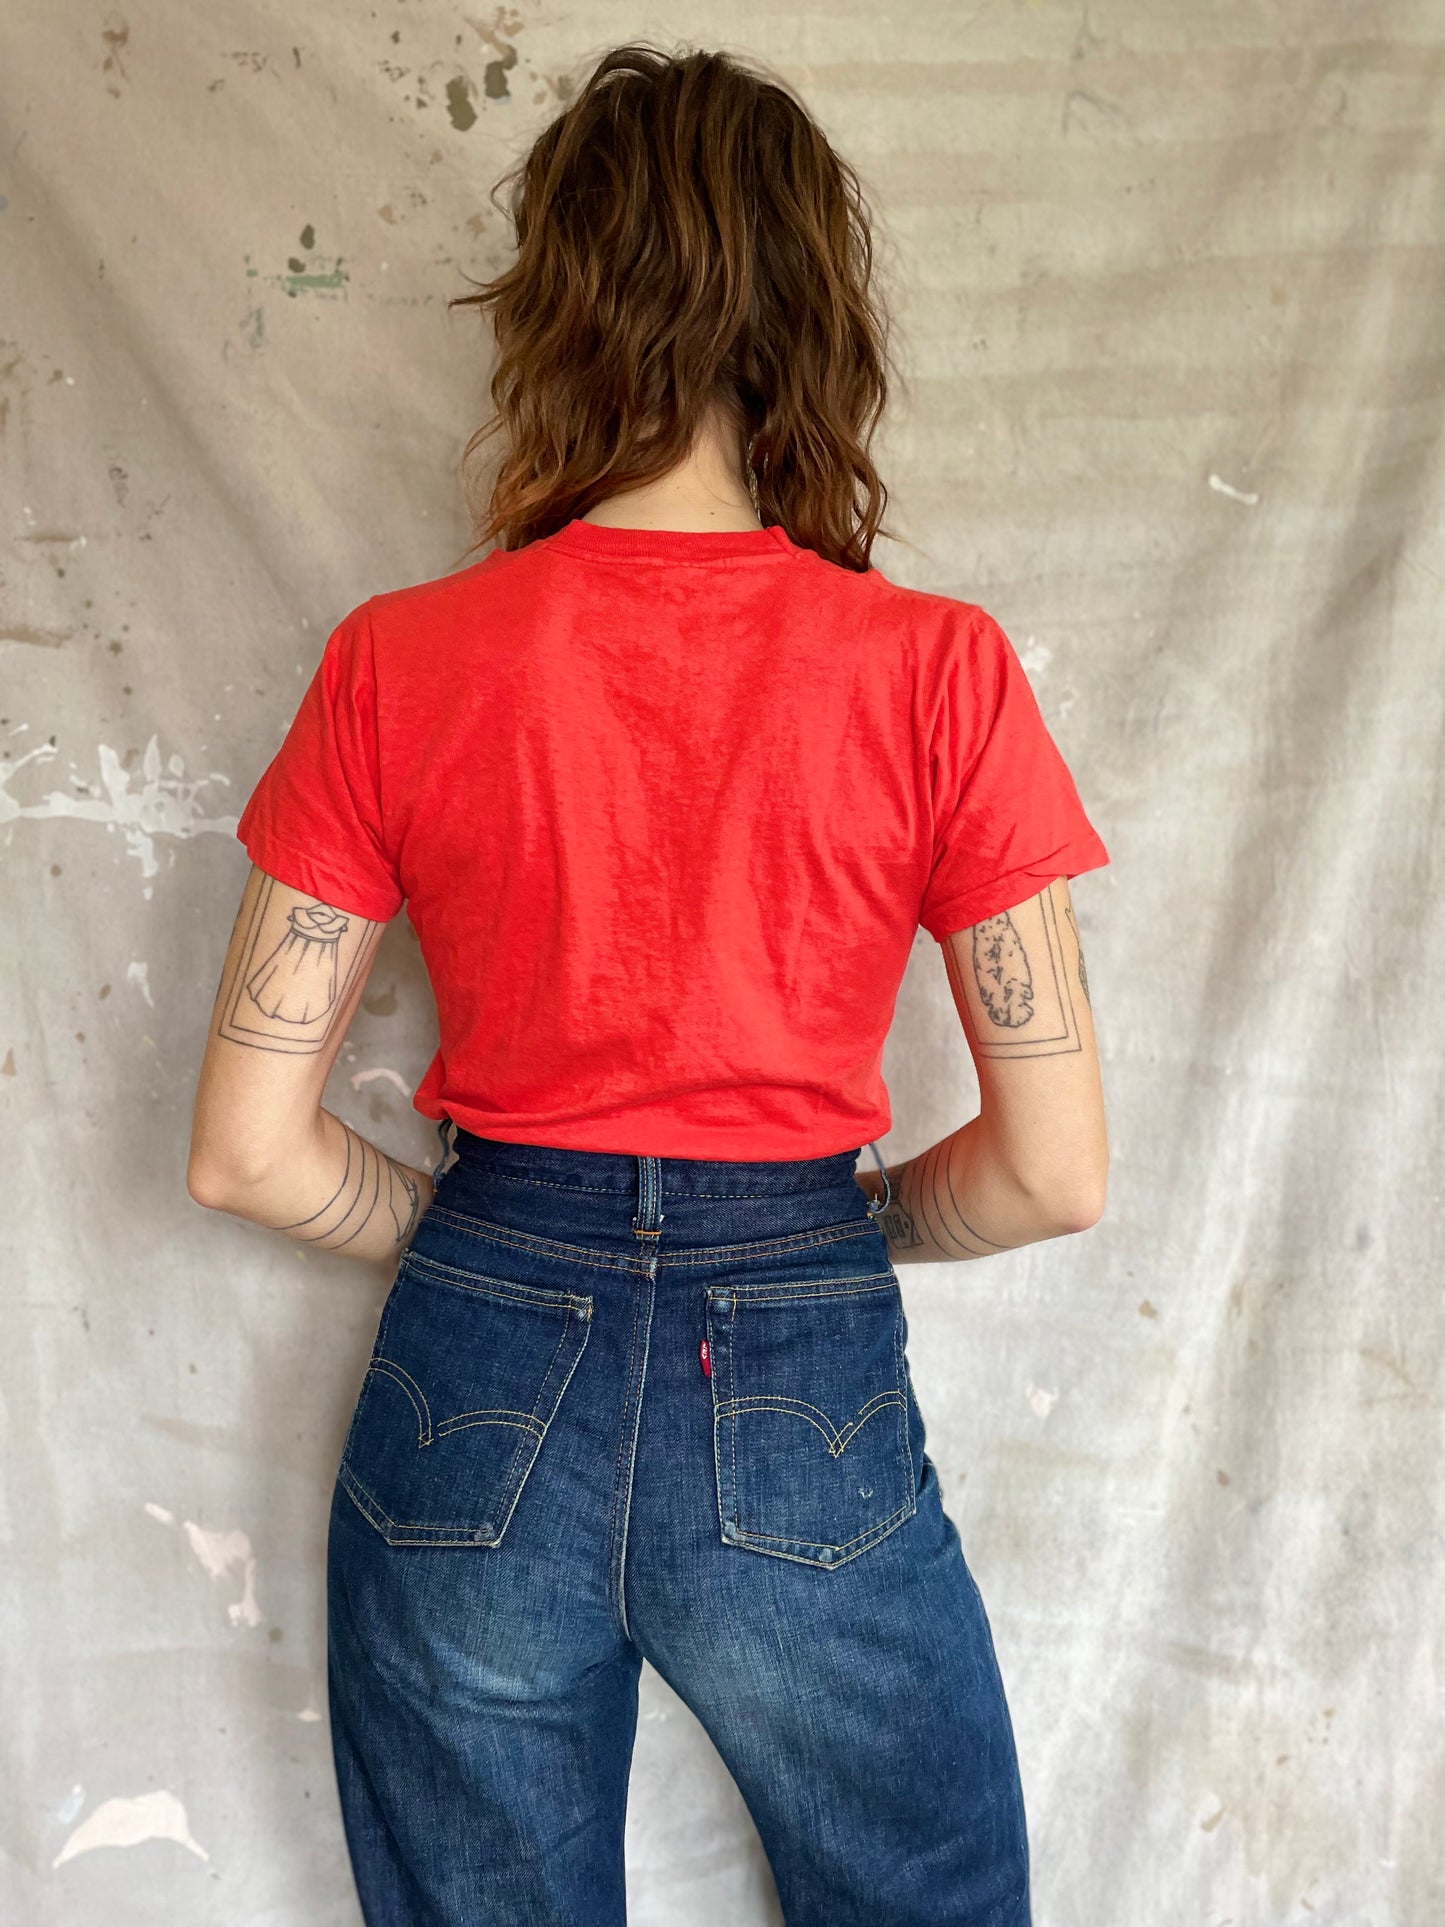 80s Bright Red Pocket Tee